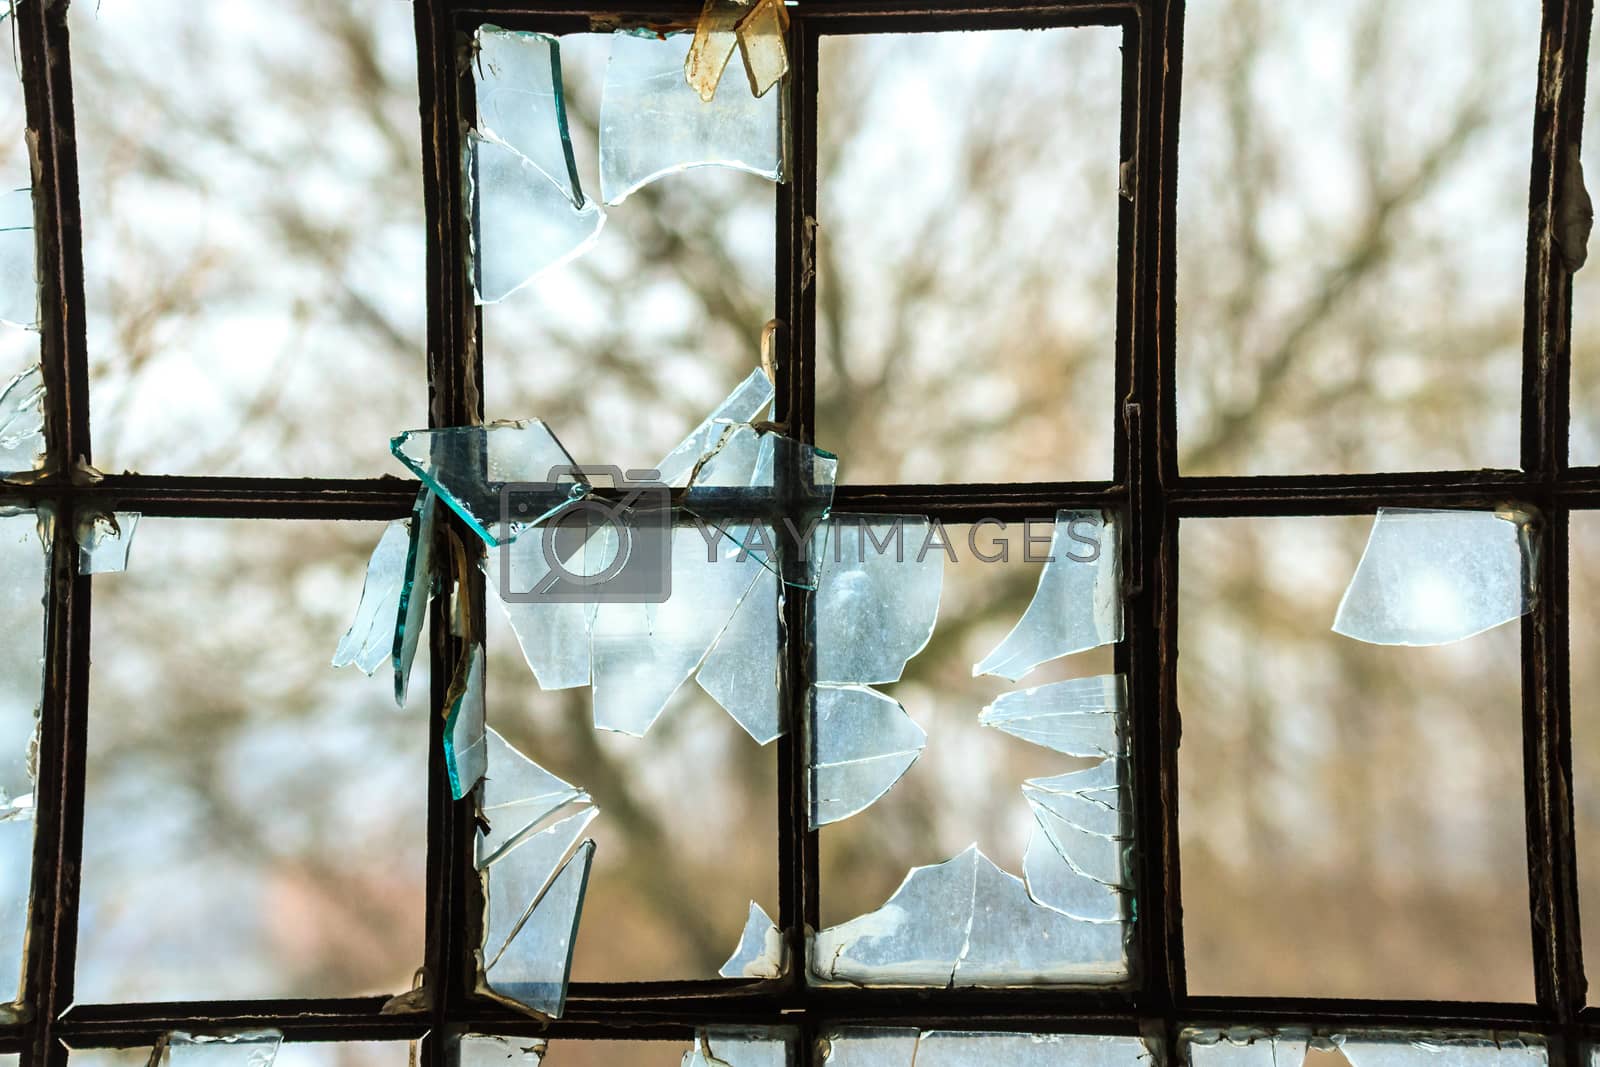 Royalty free image of windows by TSpider